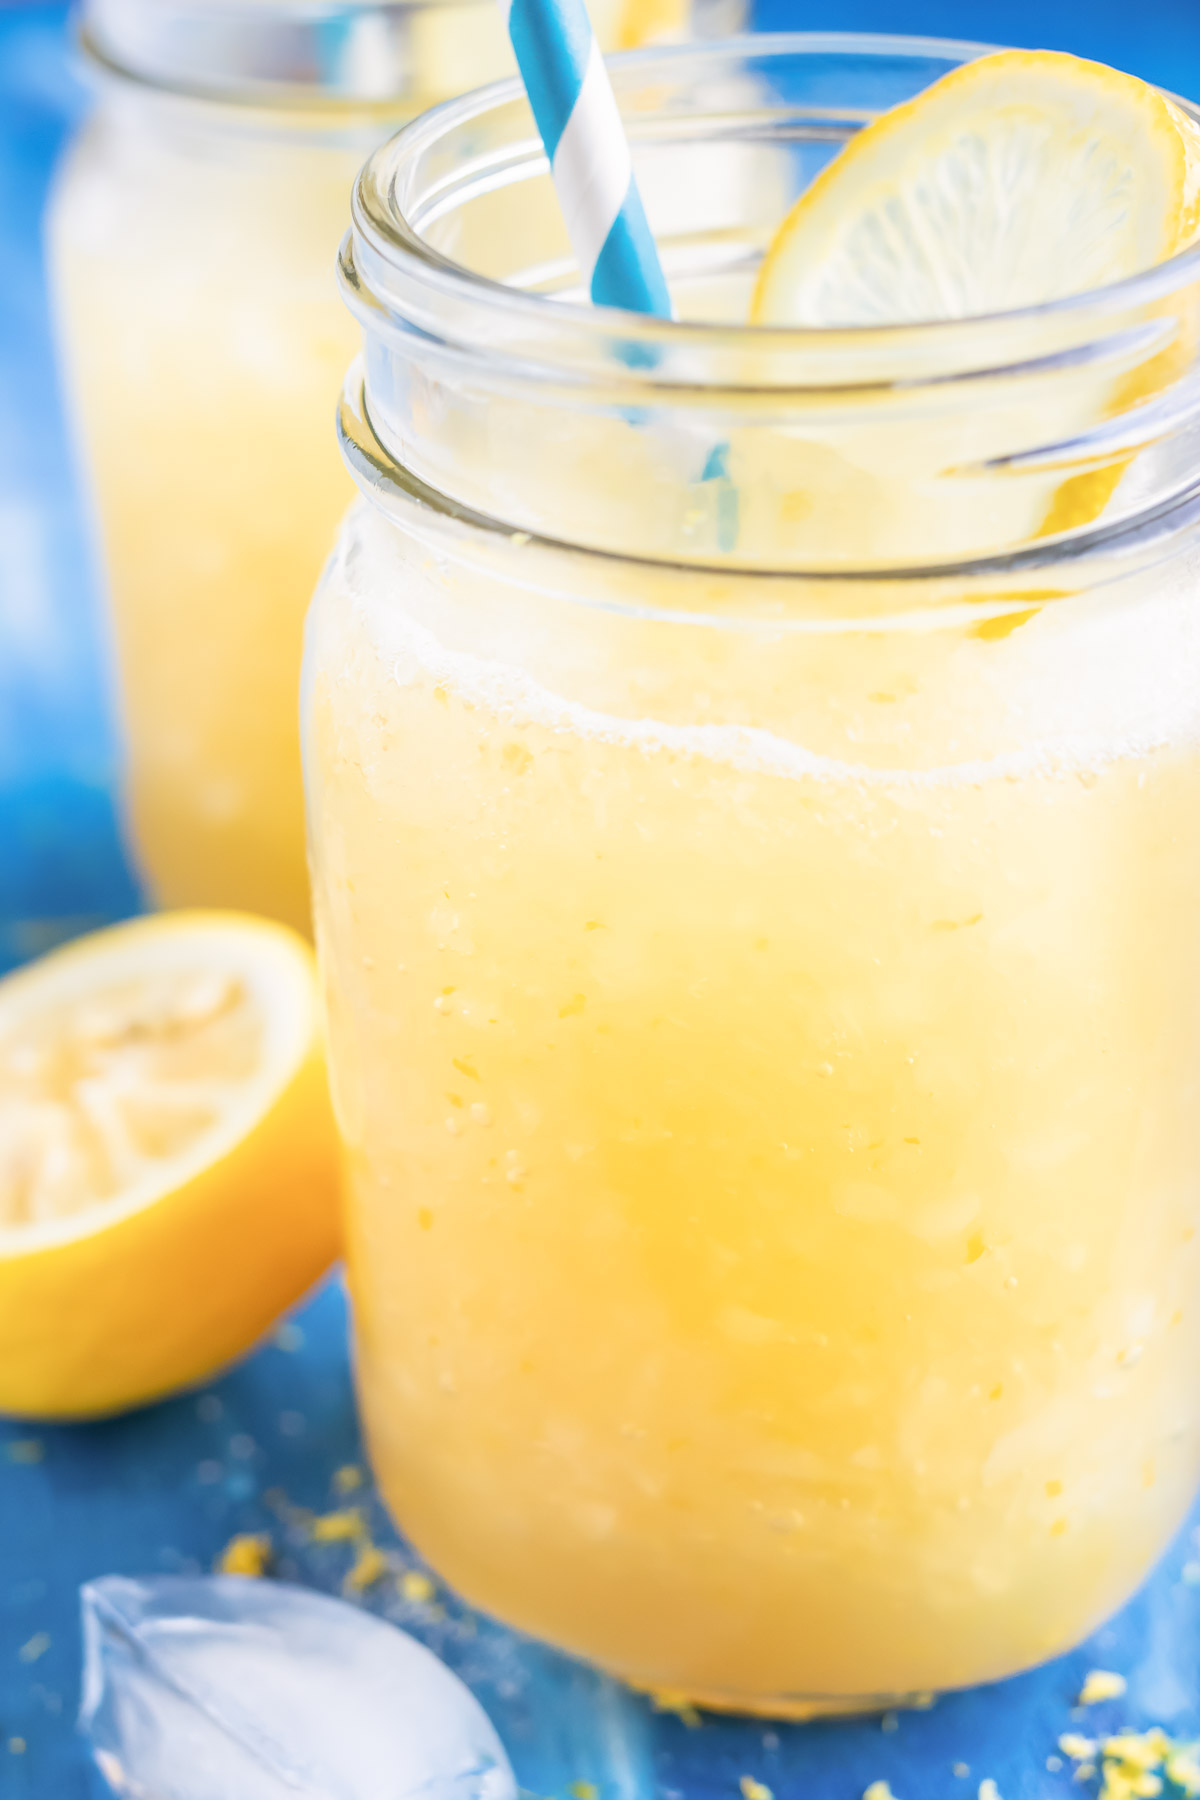 A glass full of a yellow icey drink made with lemons, sugar, and water.